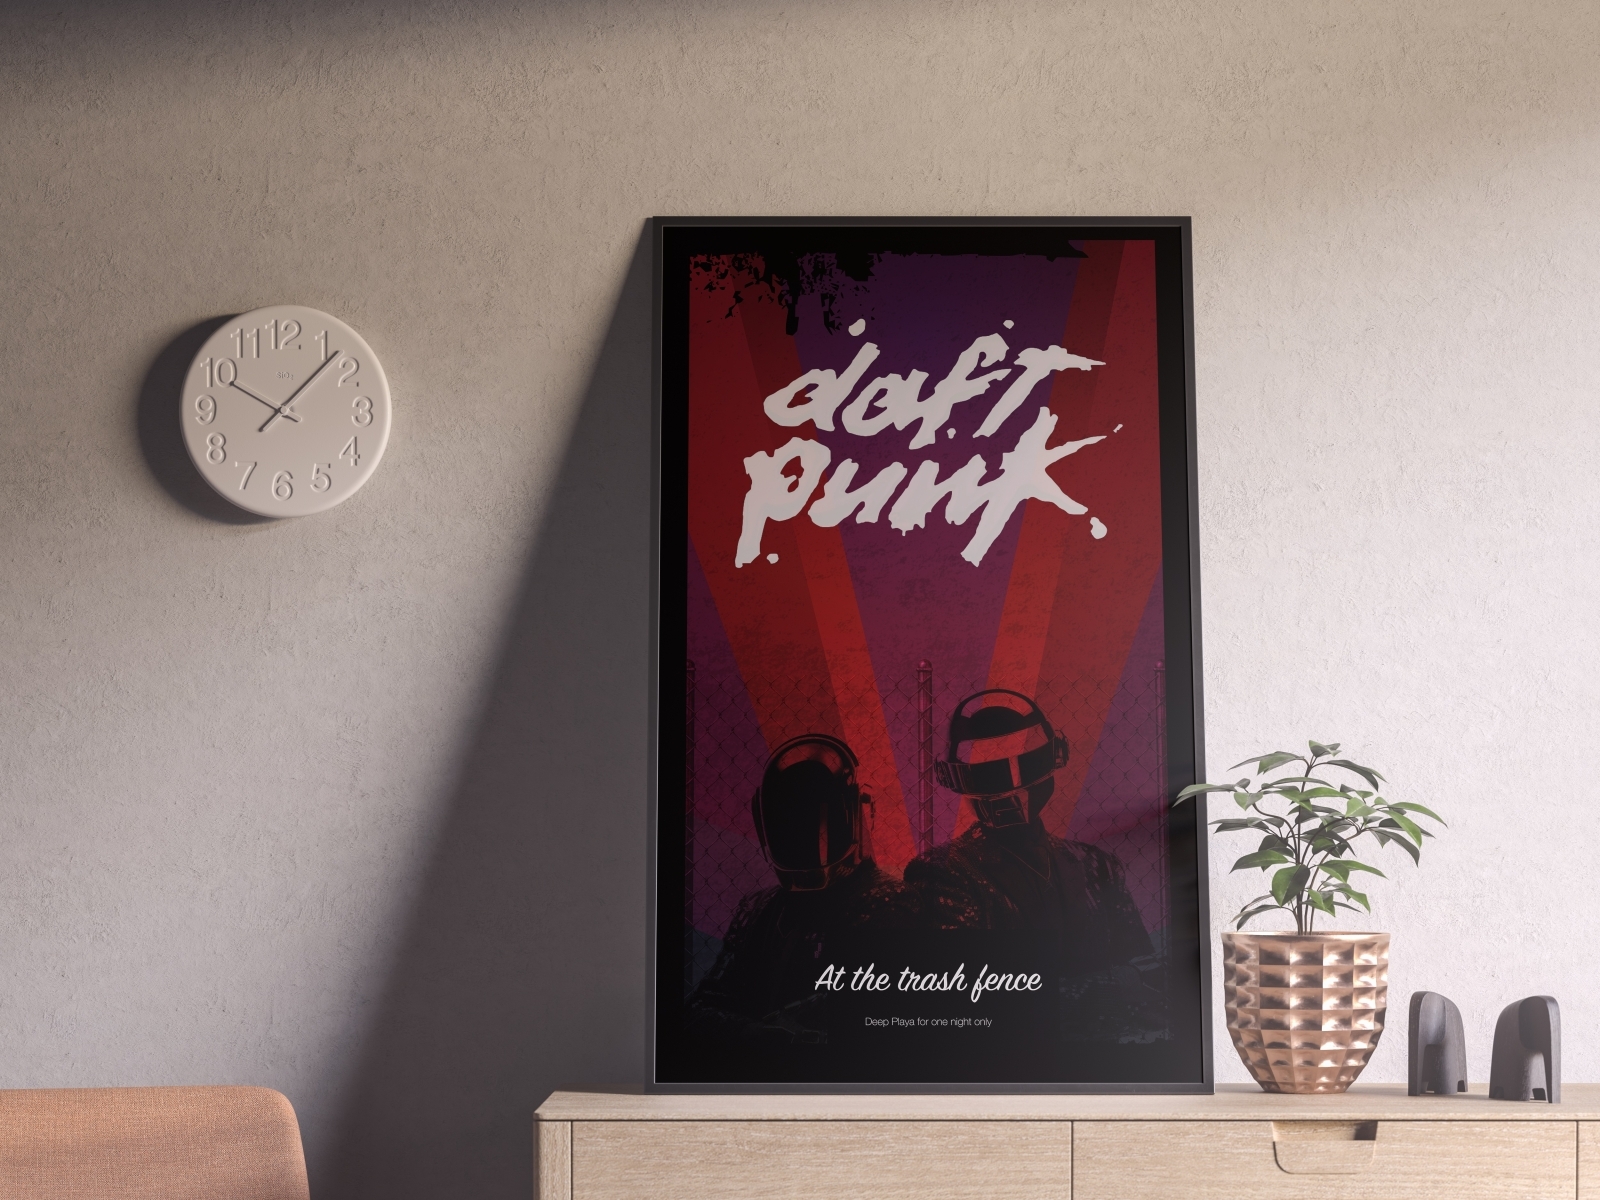 Daft Punk Poster by James on Dribbble